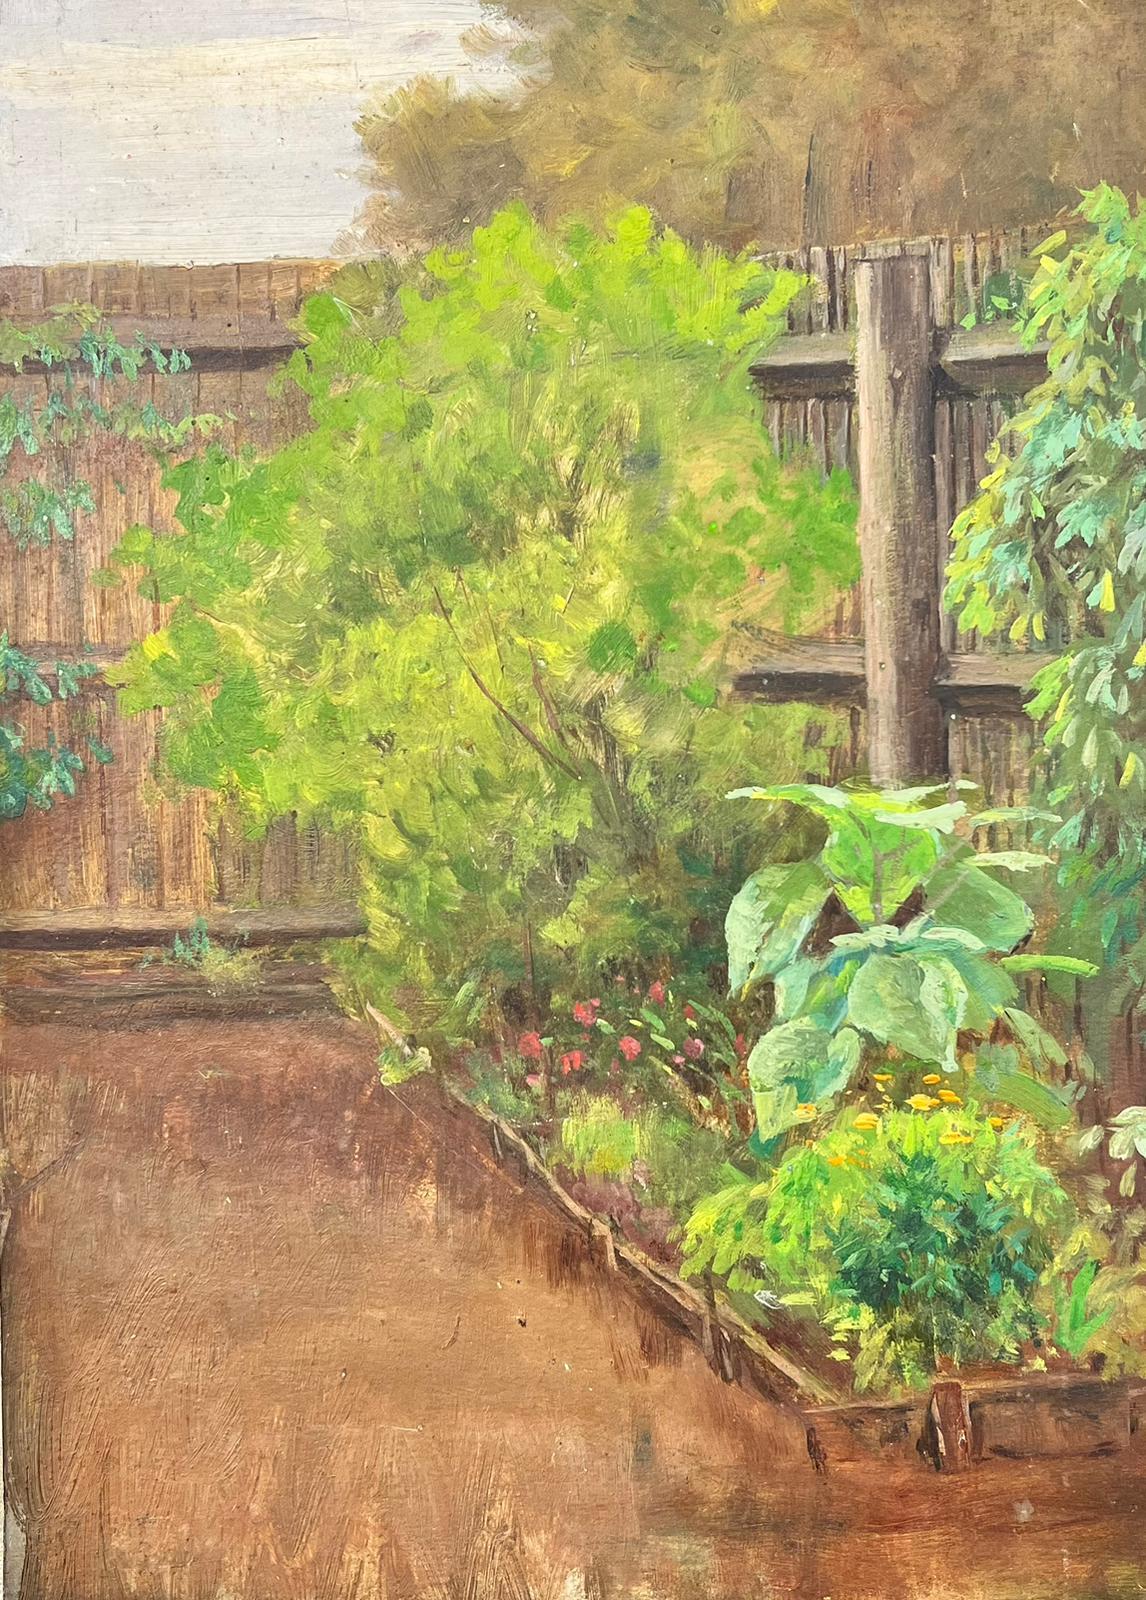 Artist/ School: English School, late 19th/ early 20th century.
The painting came from a large collection of works by one artist. A very few of them are signed what looks to be 'F. Wardle'. 

Title: Garden Food Patch

Medium: oil on thin canvas,